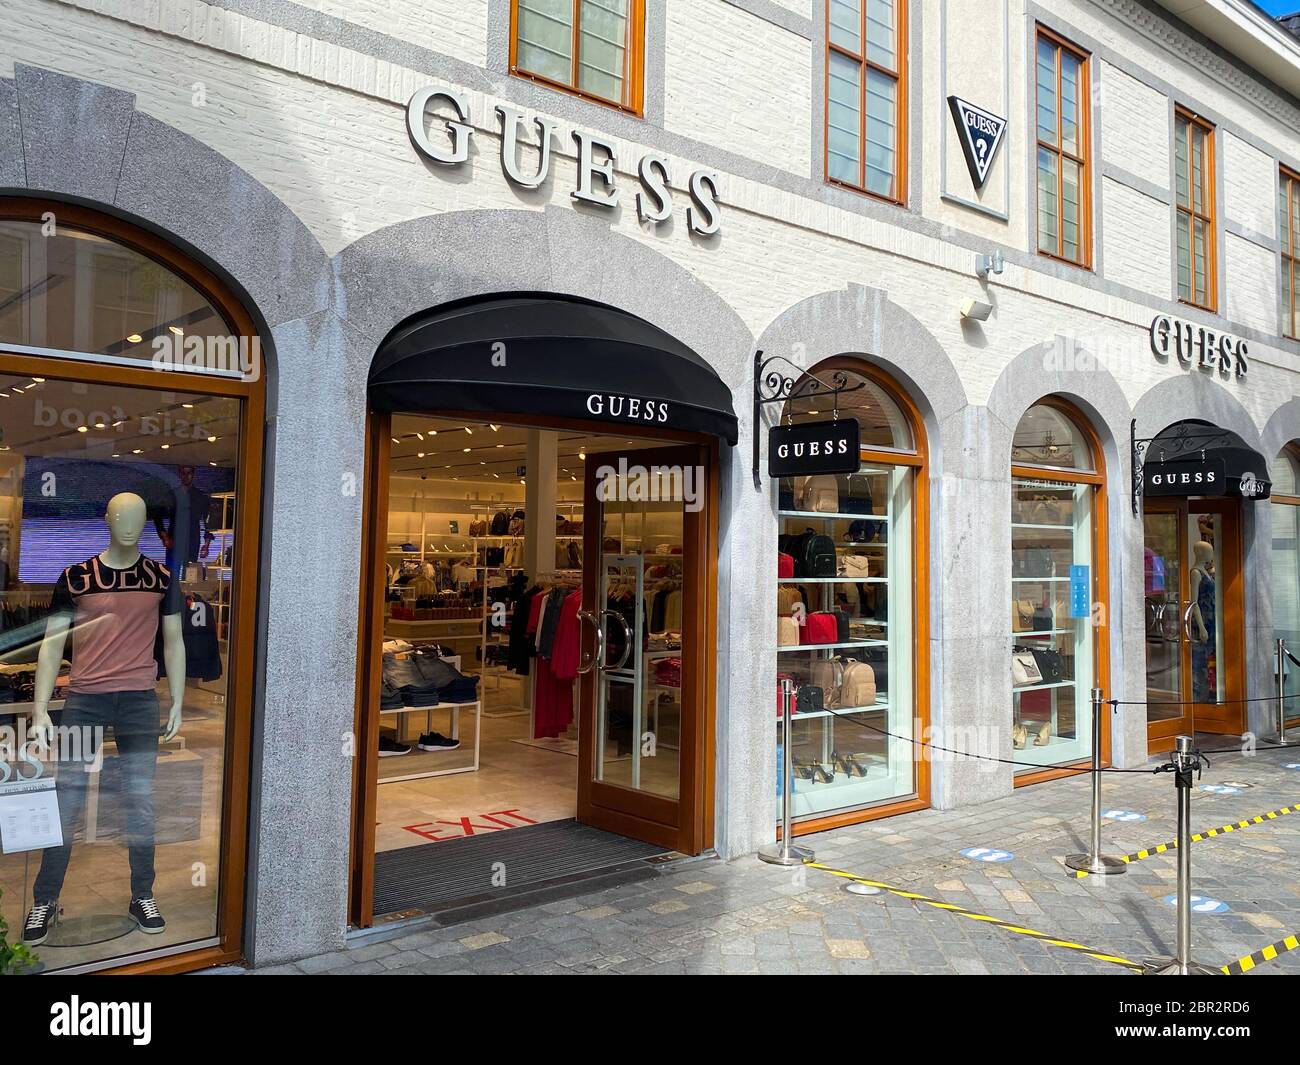 Roermond, Netherlands - May 19. 2020: View on facade with logo lettering of  Guess fashion company at shop entrance Stock Photo - Alamy